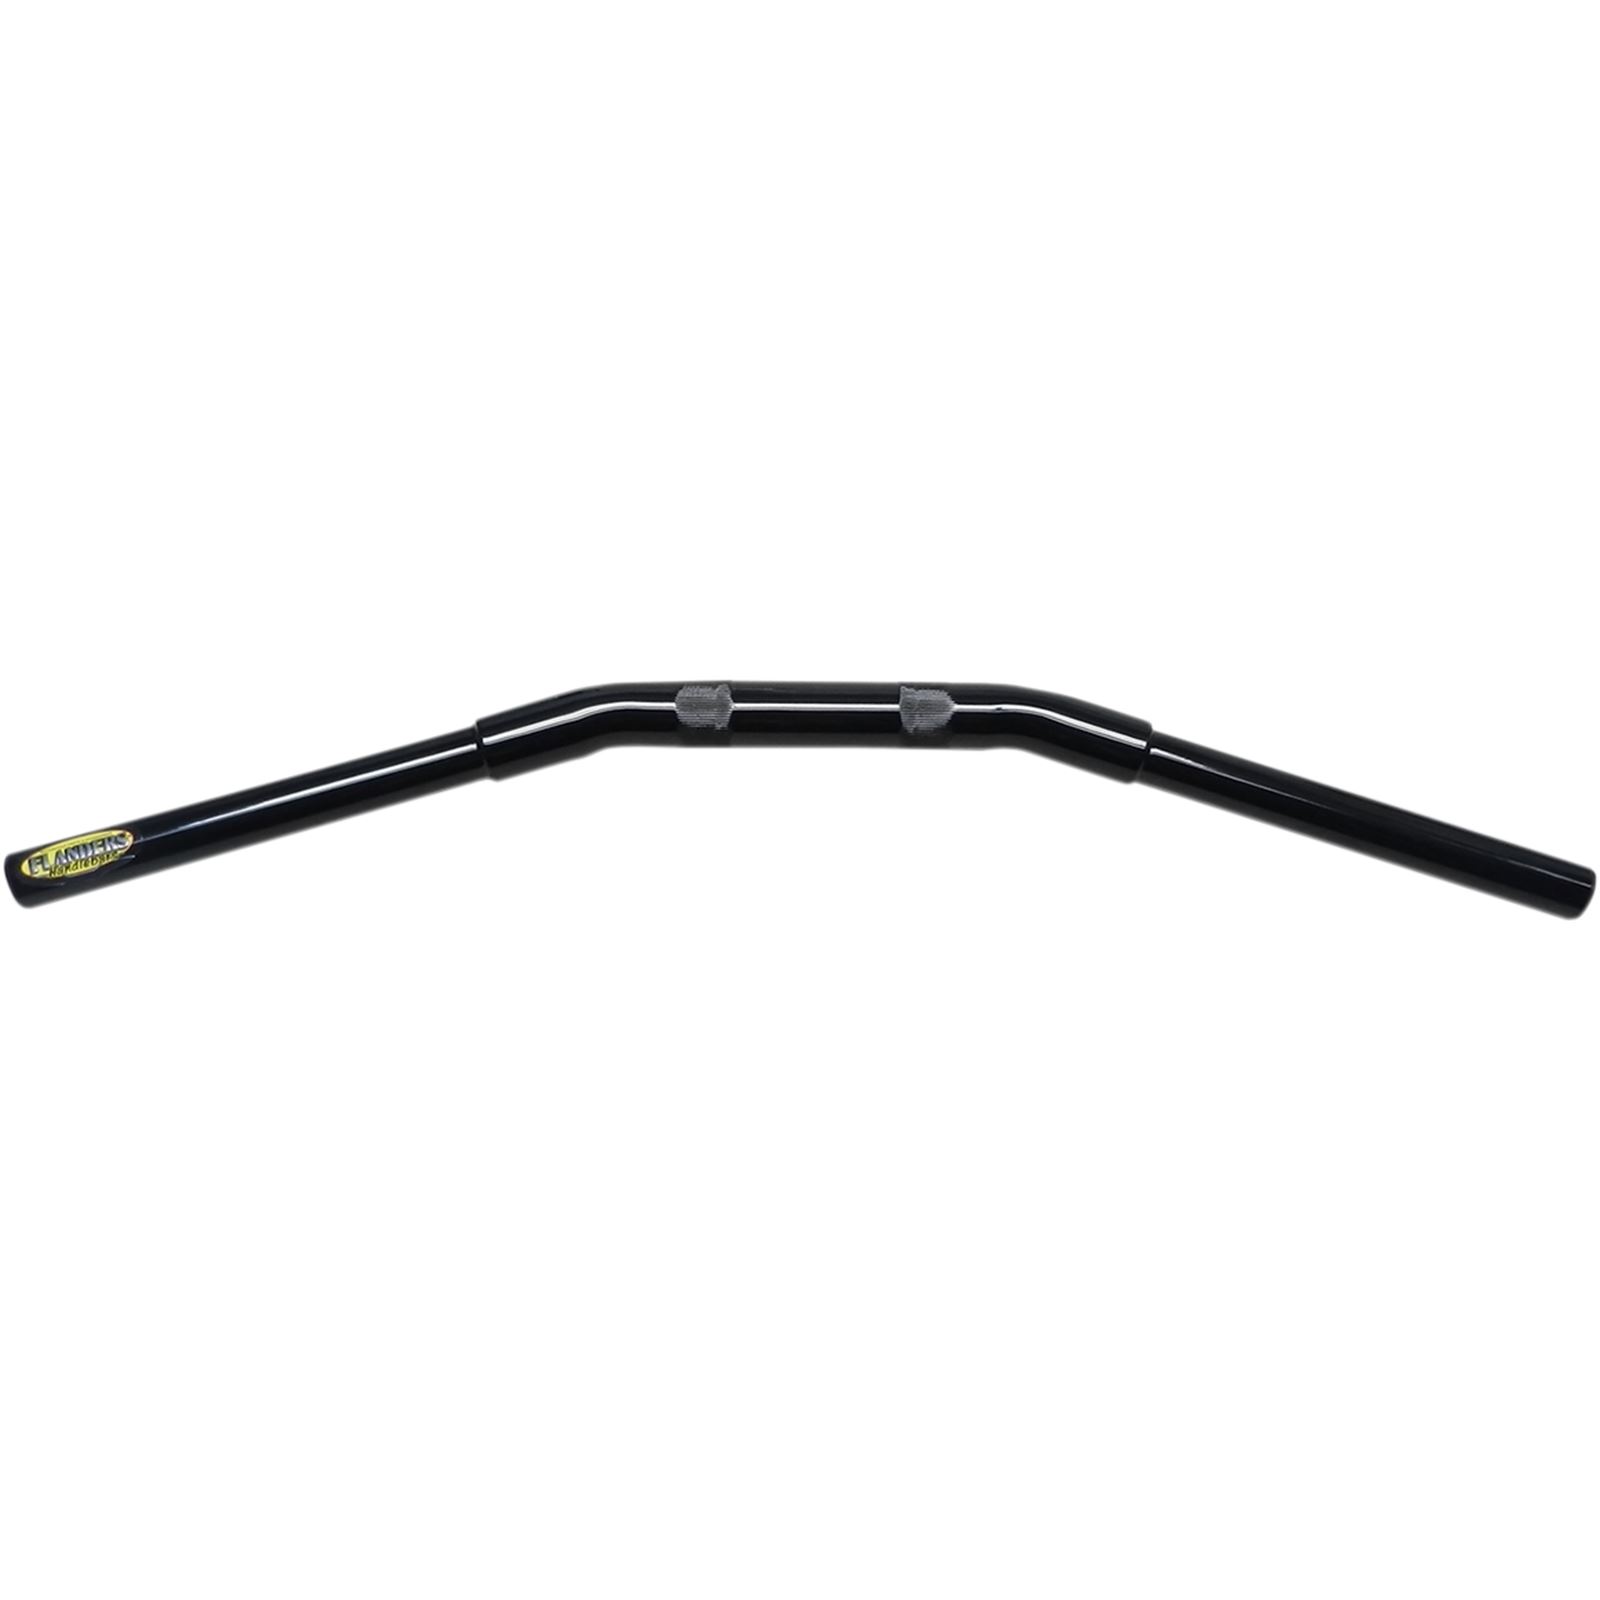 Flanders Black 1-1/4" Drag Handlebar for Throttle-by-Wire